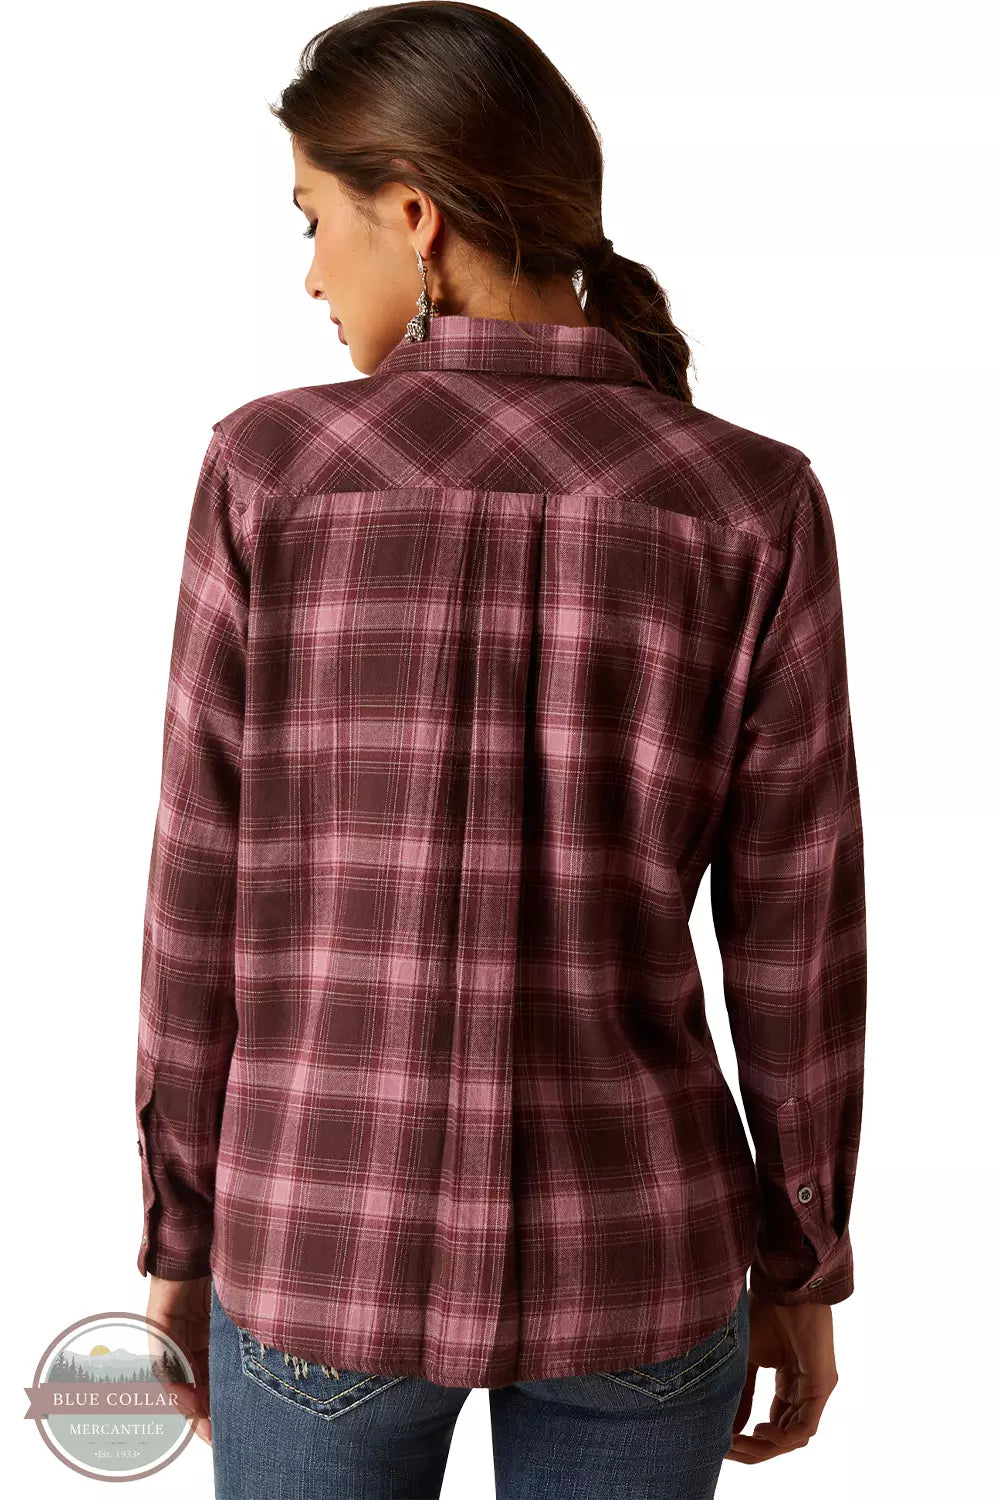 REAL Billie Jean Shirt in Lucky Plaid by Ariat 10047398